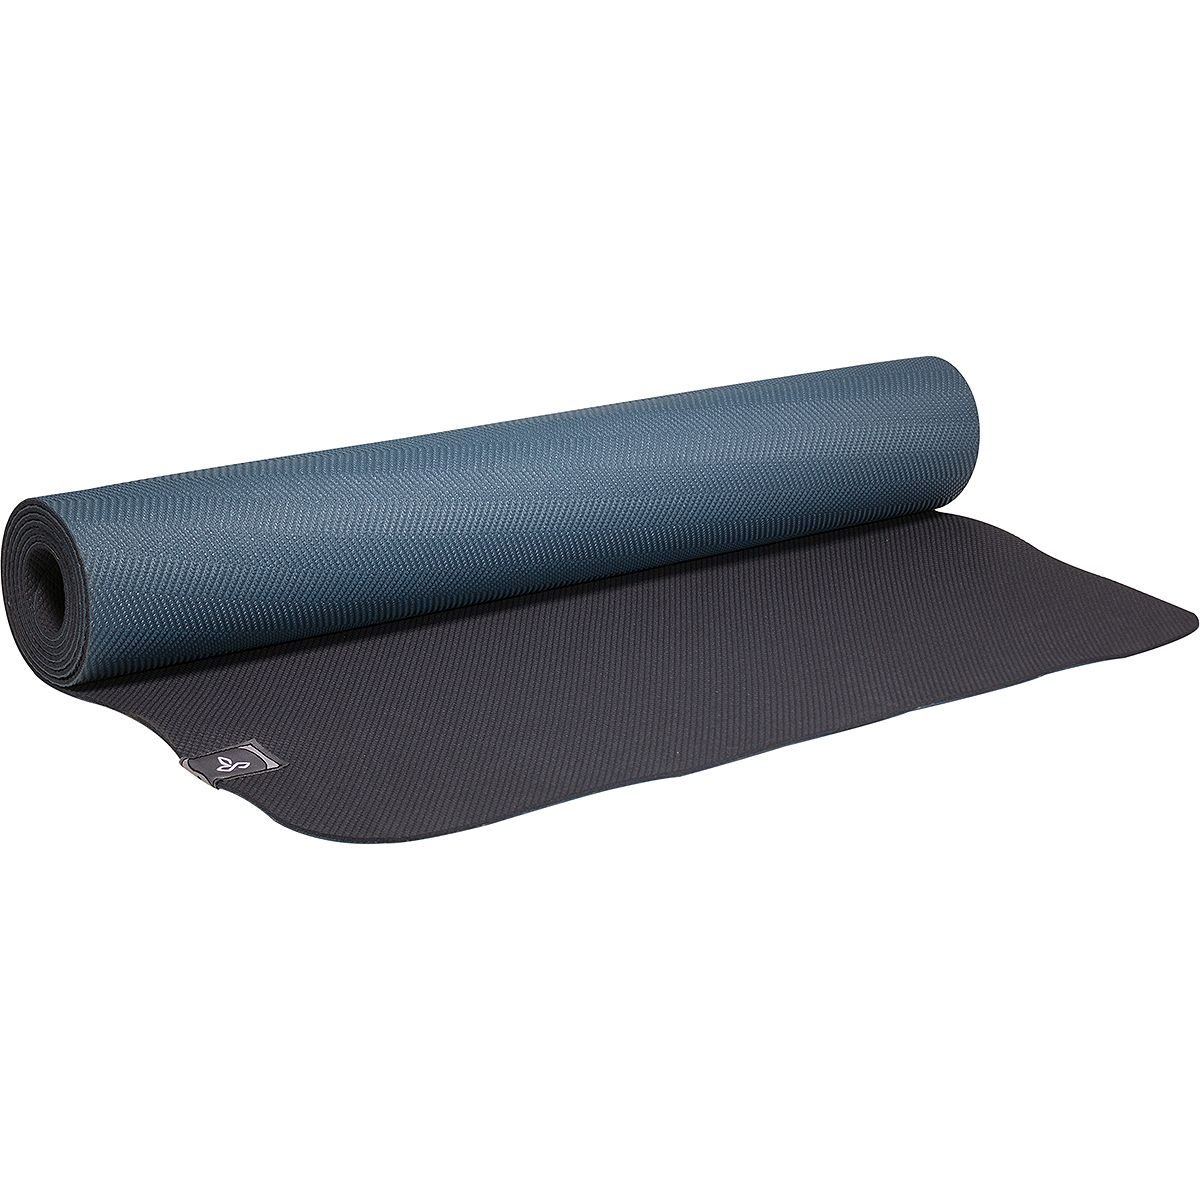 Prana Nomad Travel Yoga Mat  Outdoor Clothing & Gear For Skiing